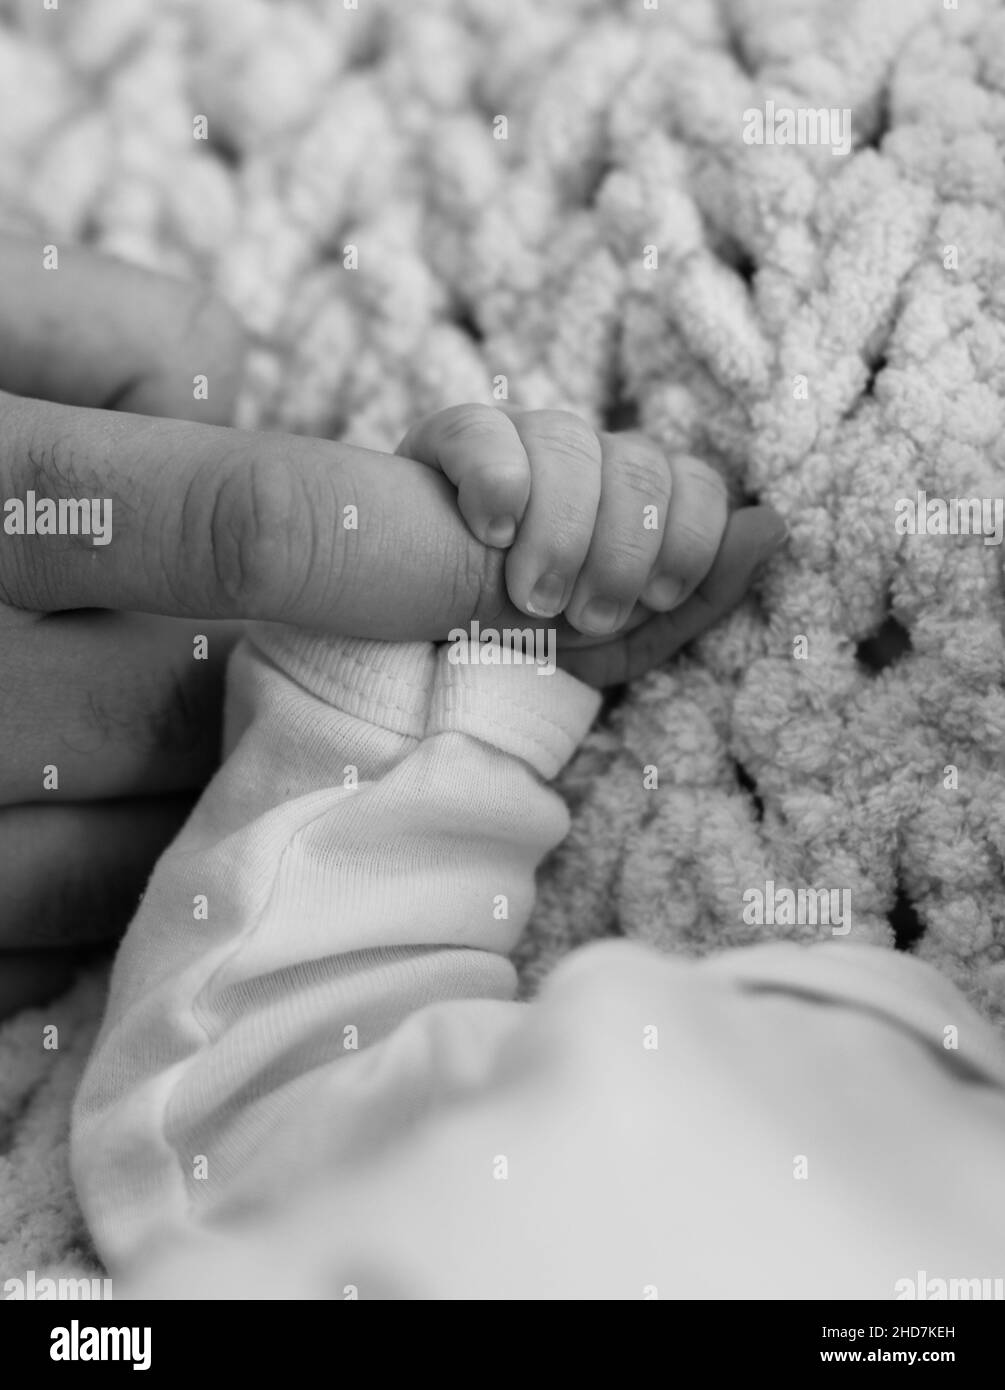 Newborn baby holding parent's hand. Black and white close up shot of baby's hand and fingers. Gentle family moments. High quality photo Stock Photo